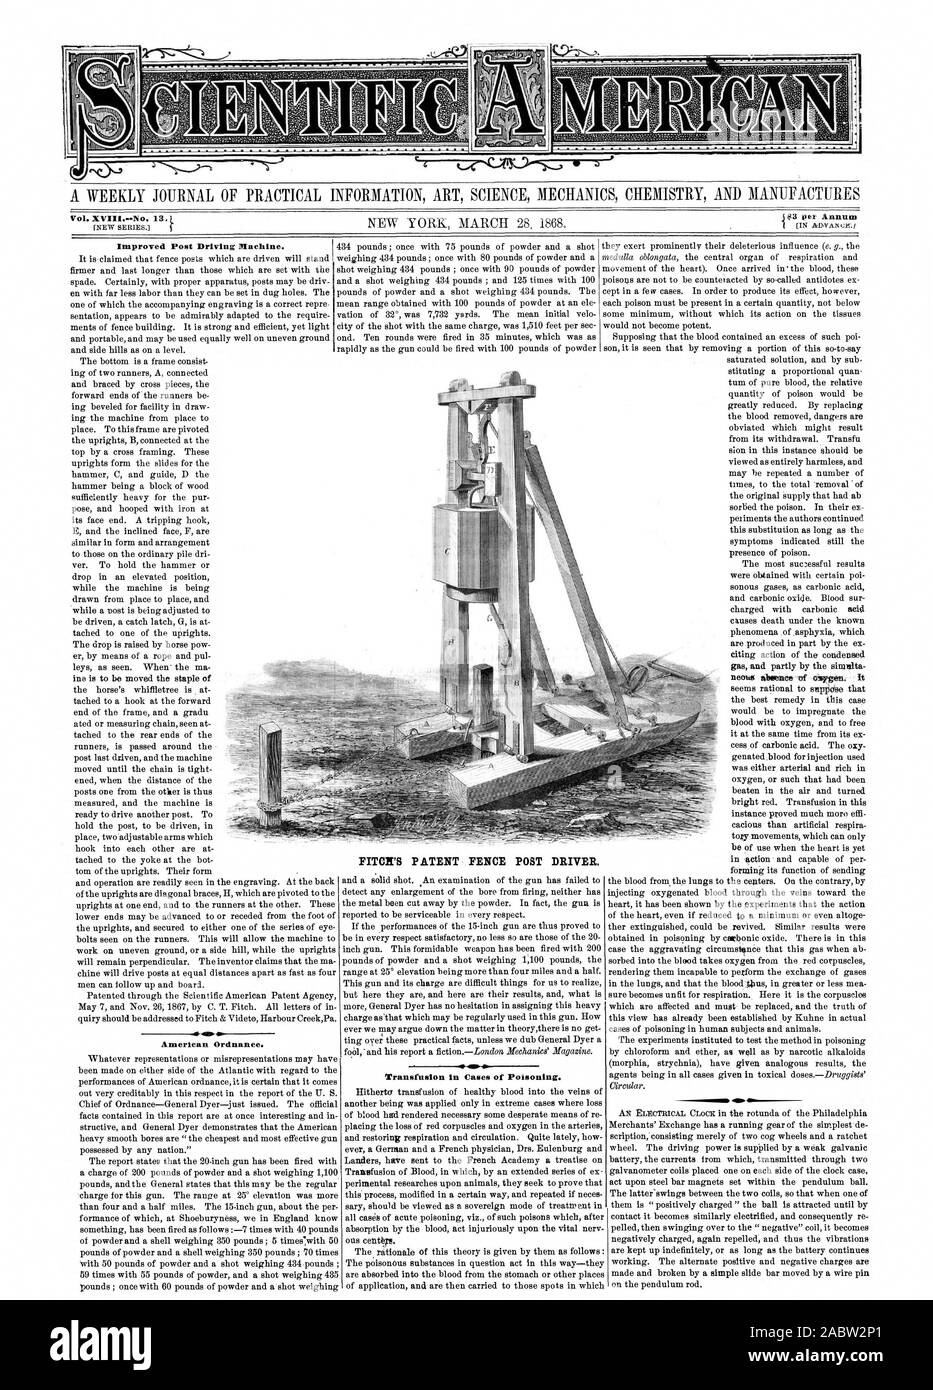 A WEEKLY JOURNAL OF PRACTICAL INFORMATION ART SCIENCE MECHANICS CHEMISTRY AND MANUFACTURES Vol. 13. 1443 per Annum IOC Improved Post Driving Machine. American Ordnance. PITON'S PATENT FENCE POST DRIVER., scientific american, 1868-03-28 Stock Photo